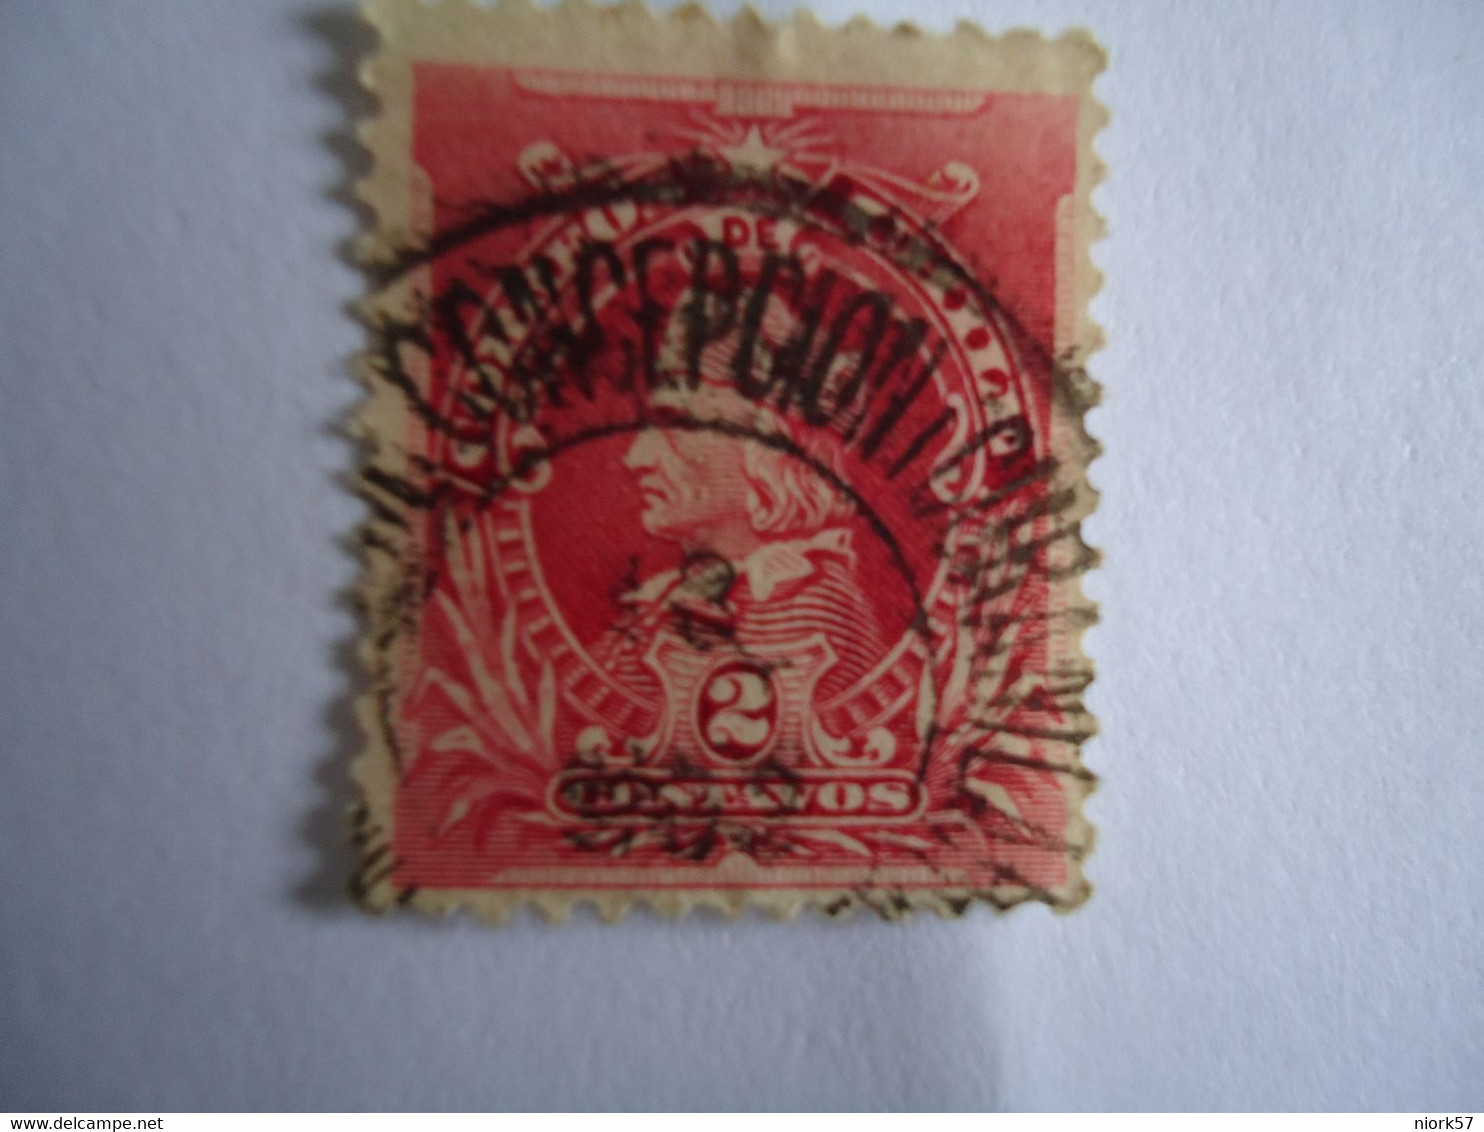 CHILE    USED   STAMPS  1901  WITH    POSTMARK - Cile